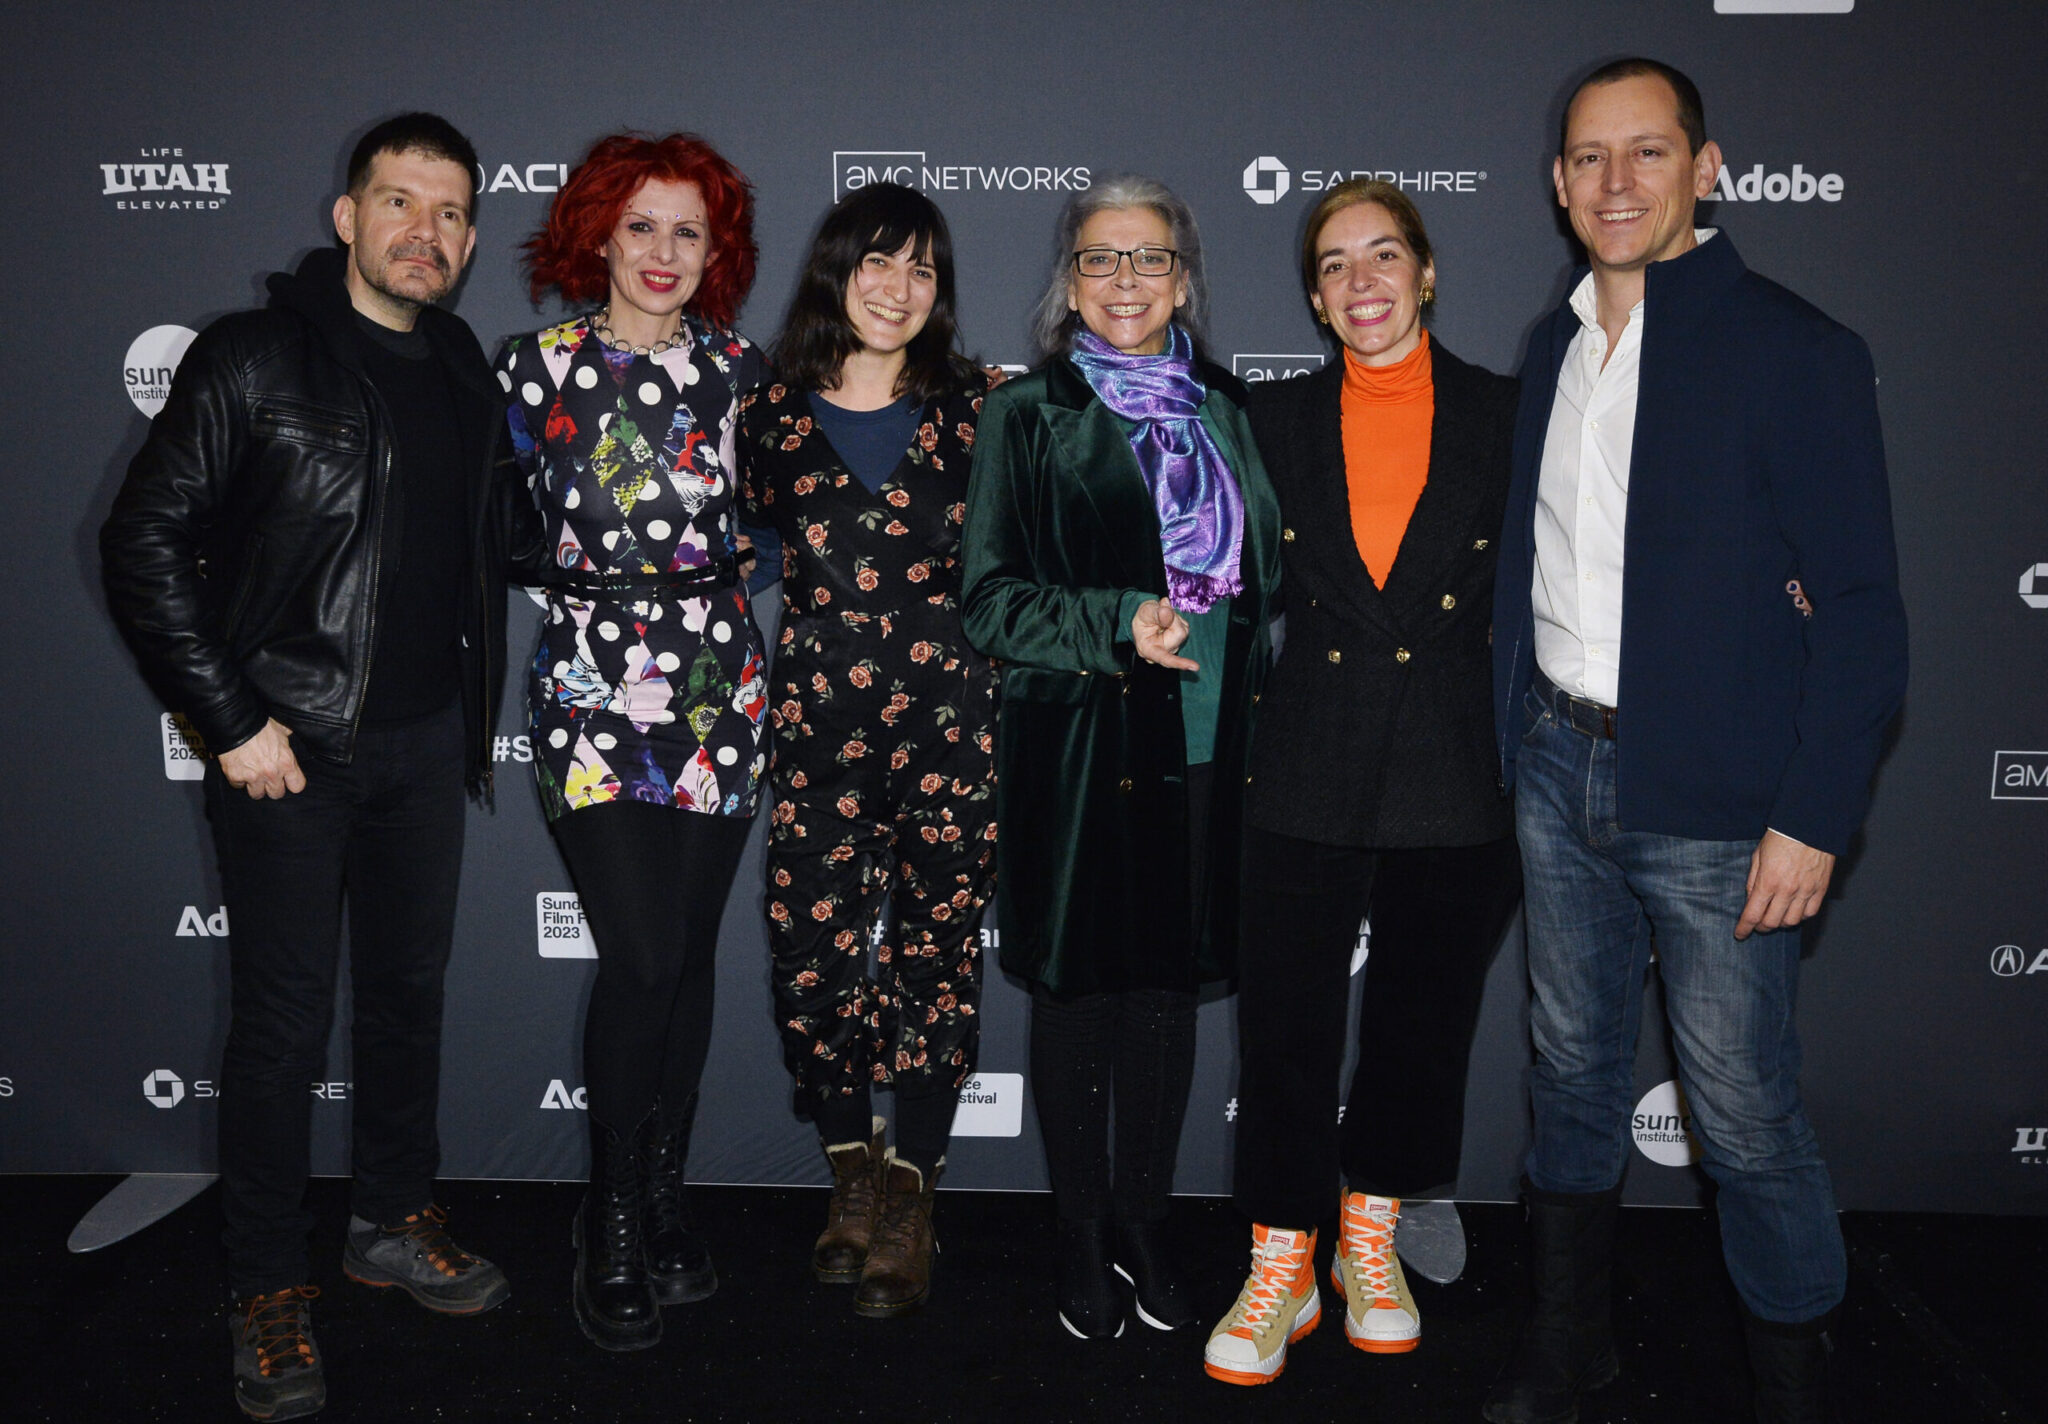 A man with dark hair in all black, a woman with red hair in a colorful dress, a woman with medium-length black hair wearing a flower dress, a woman with grey hair and a purple scarf and green coat, a woman in a black coat over an orange turtle neck, a man with a blue coat over a white shirt and jeans stand in front of a step and repeat at the 2023 Sundance Film Festival.